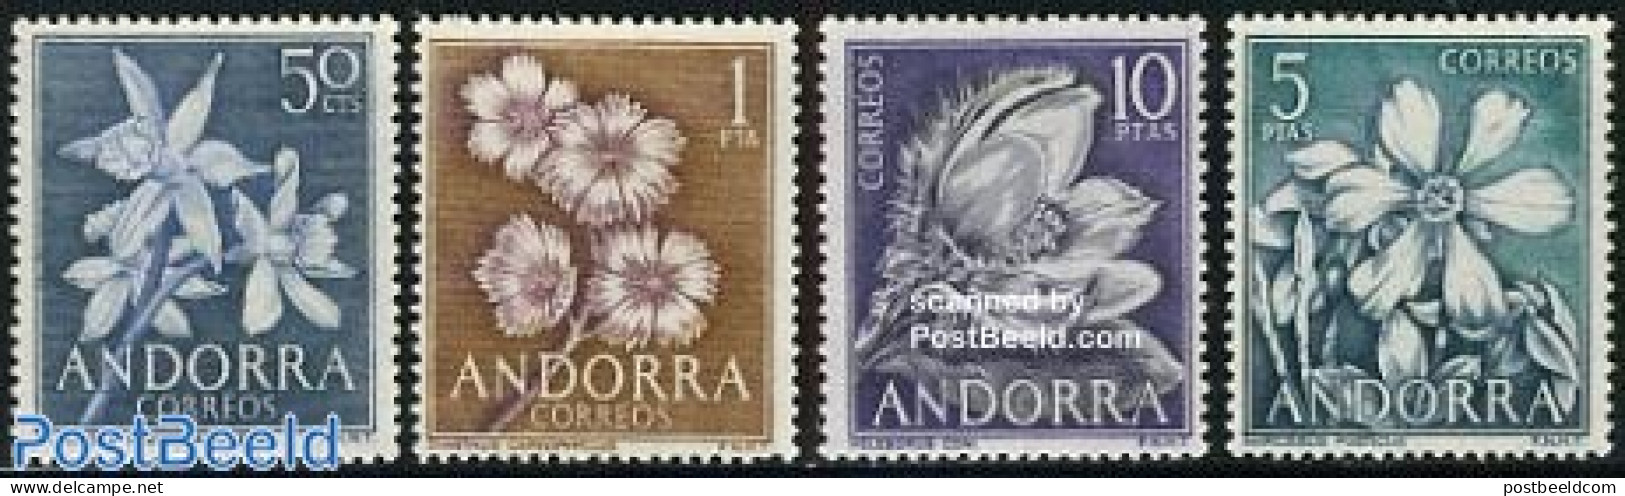 Andorra, Spanish Post 1966 Definitives, Flowers 4v, Mint NH, Nature - Flowers & Plants - Unused Stamps